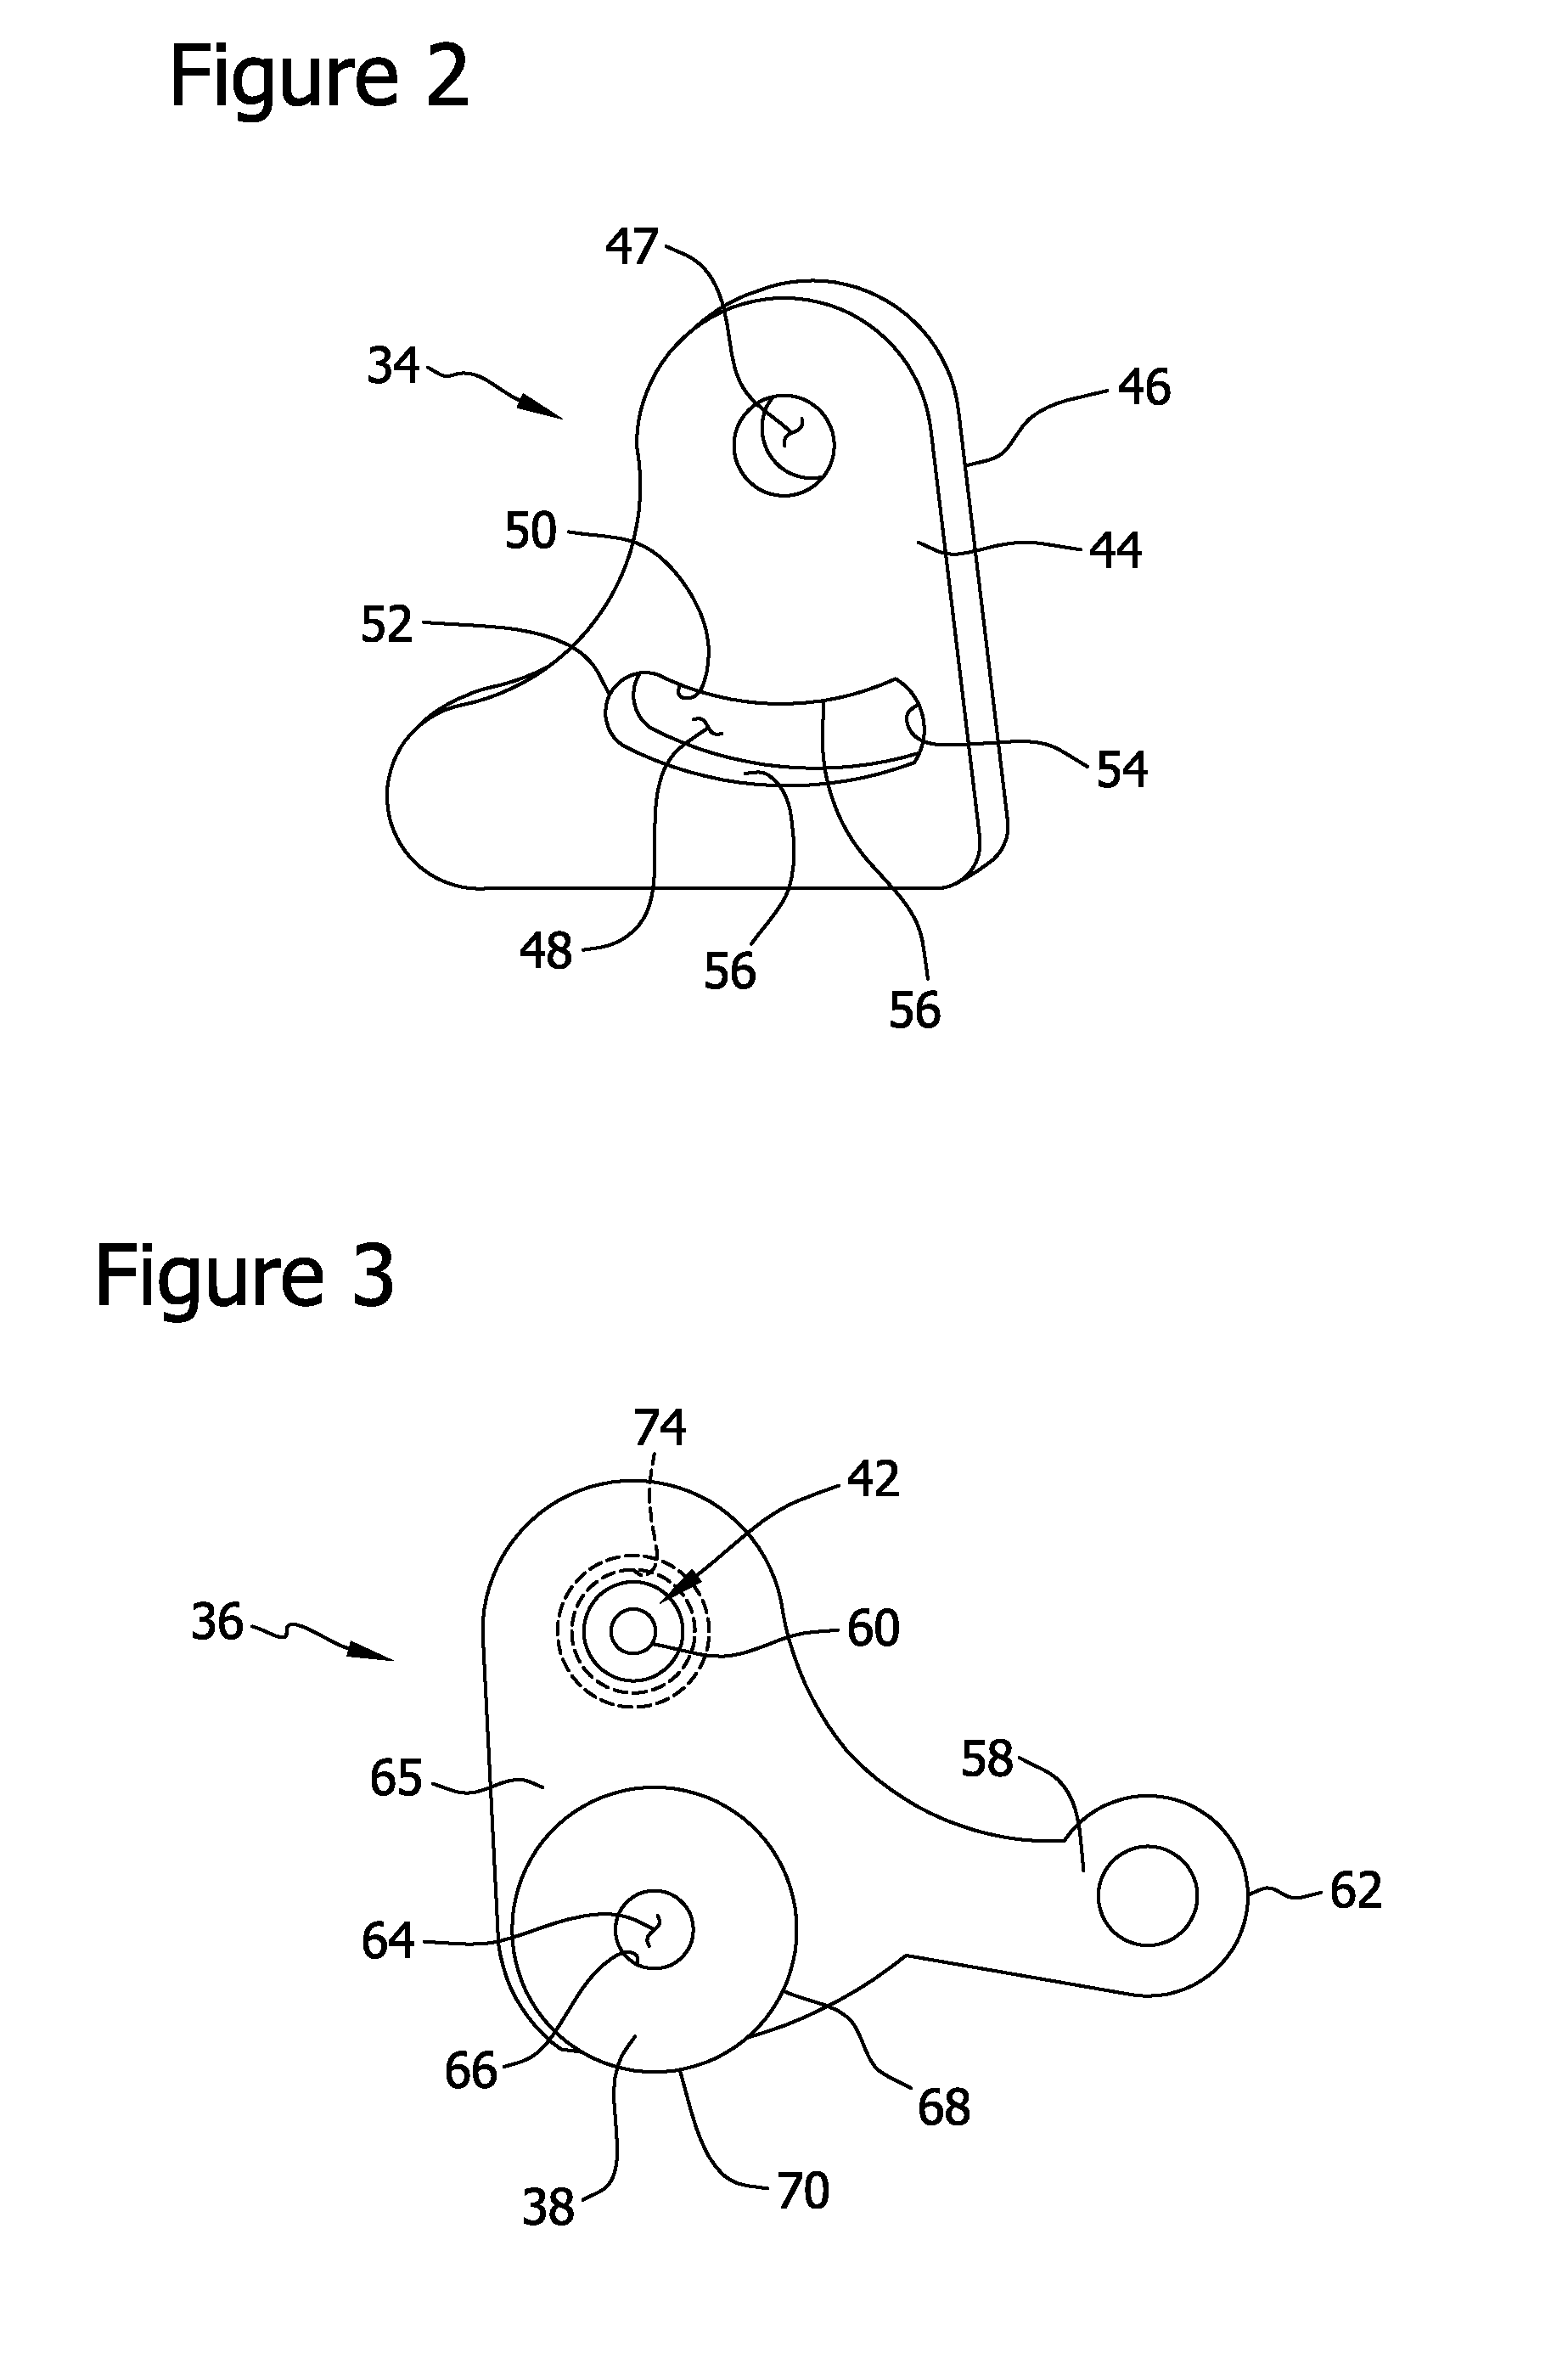 Cutting tool and method of operating same